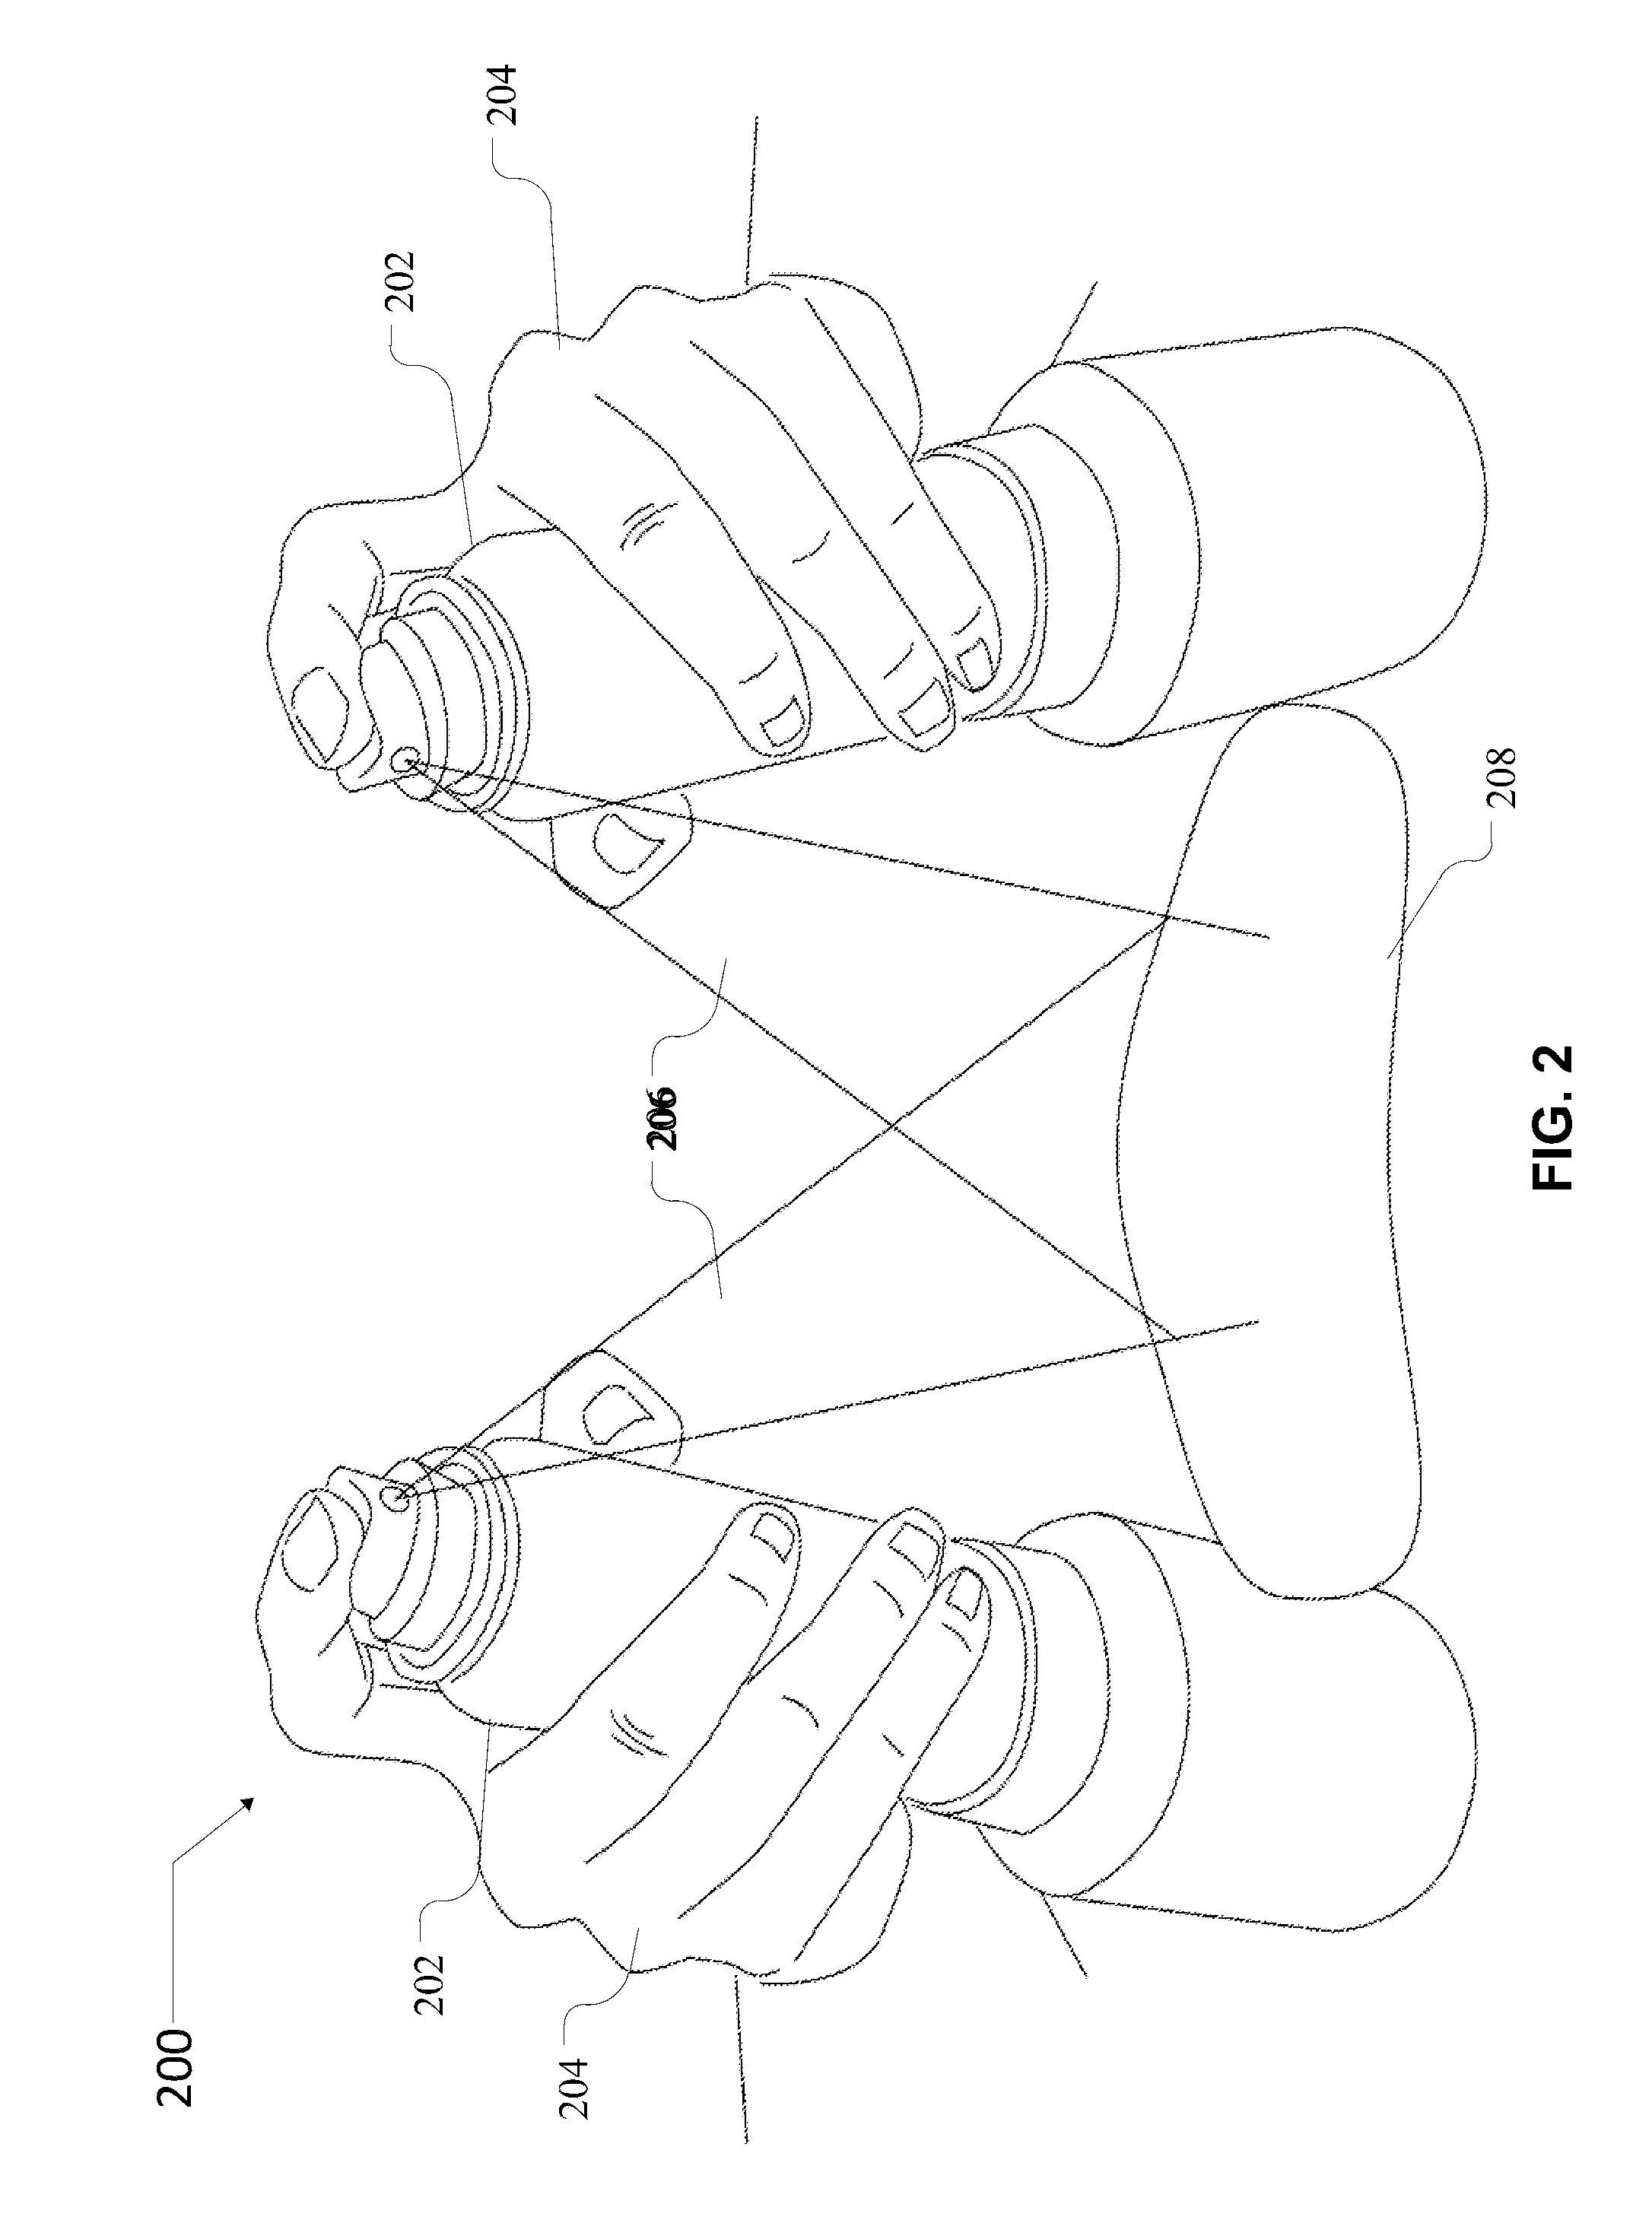 System and Method of Applying a Chrome-Like Coating on Objects